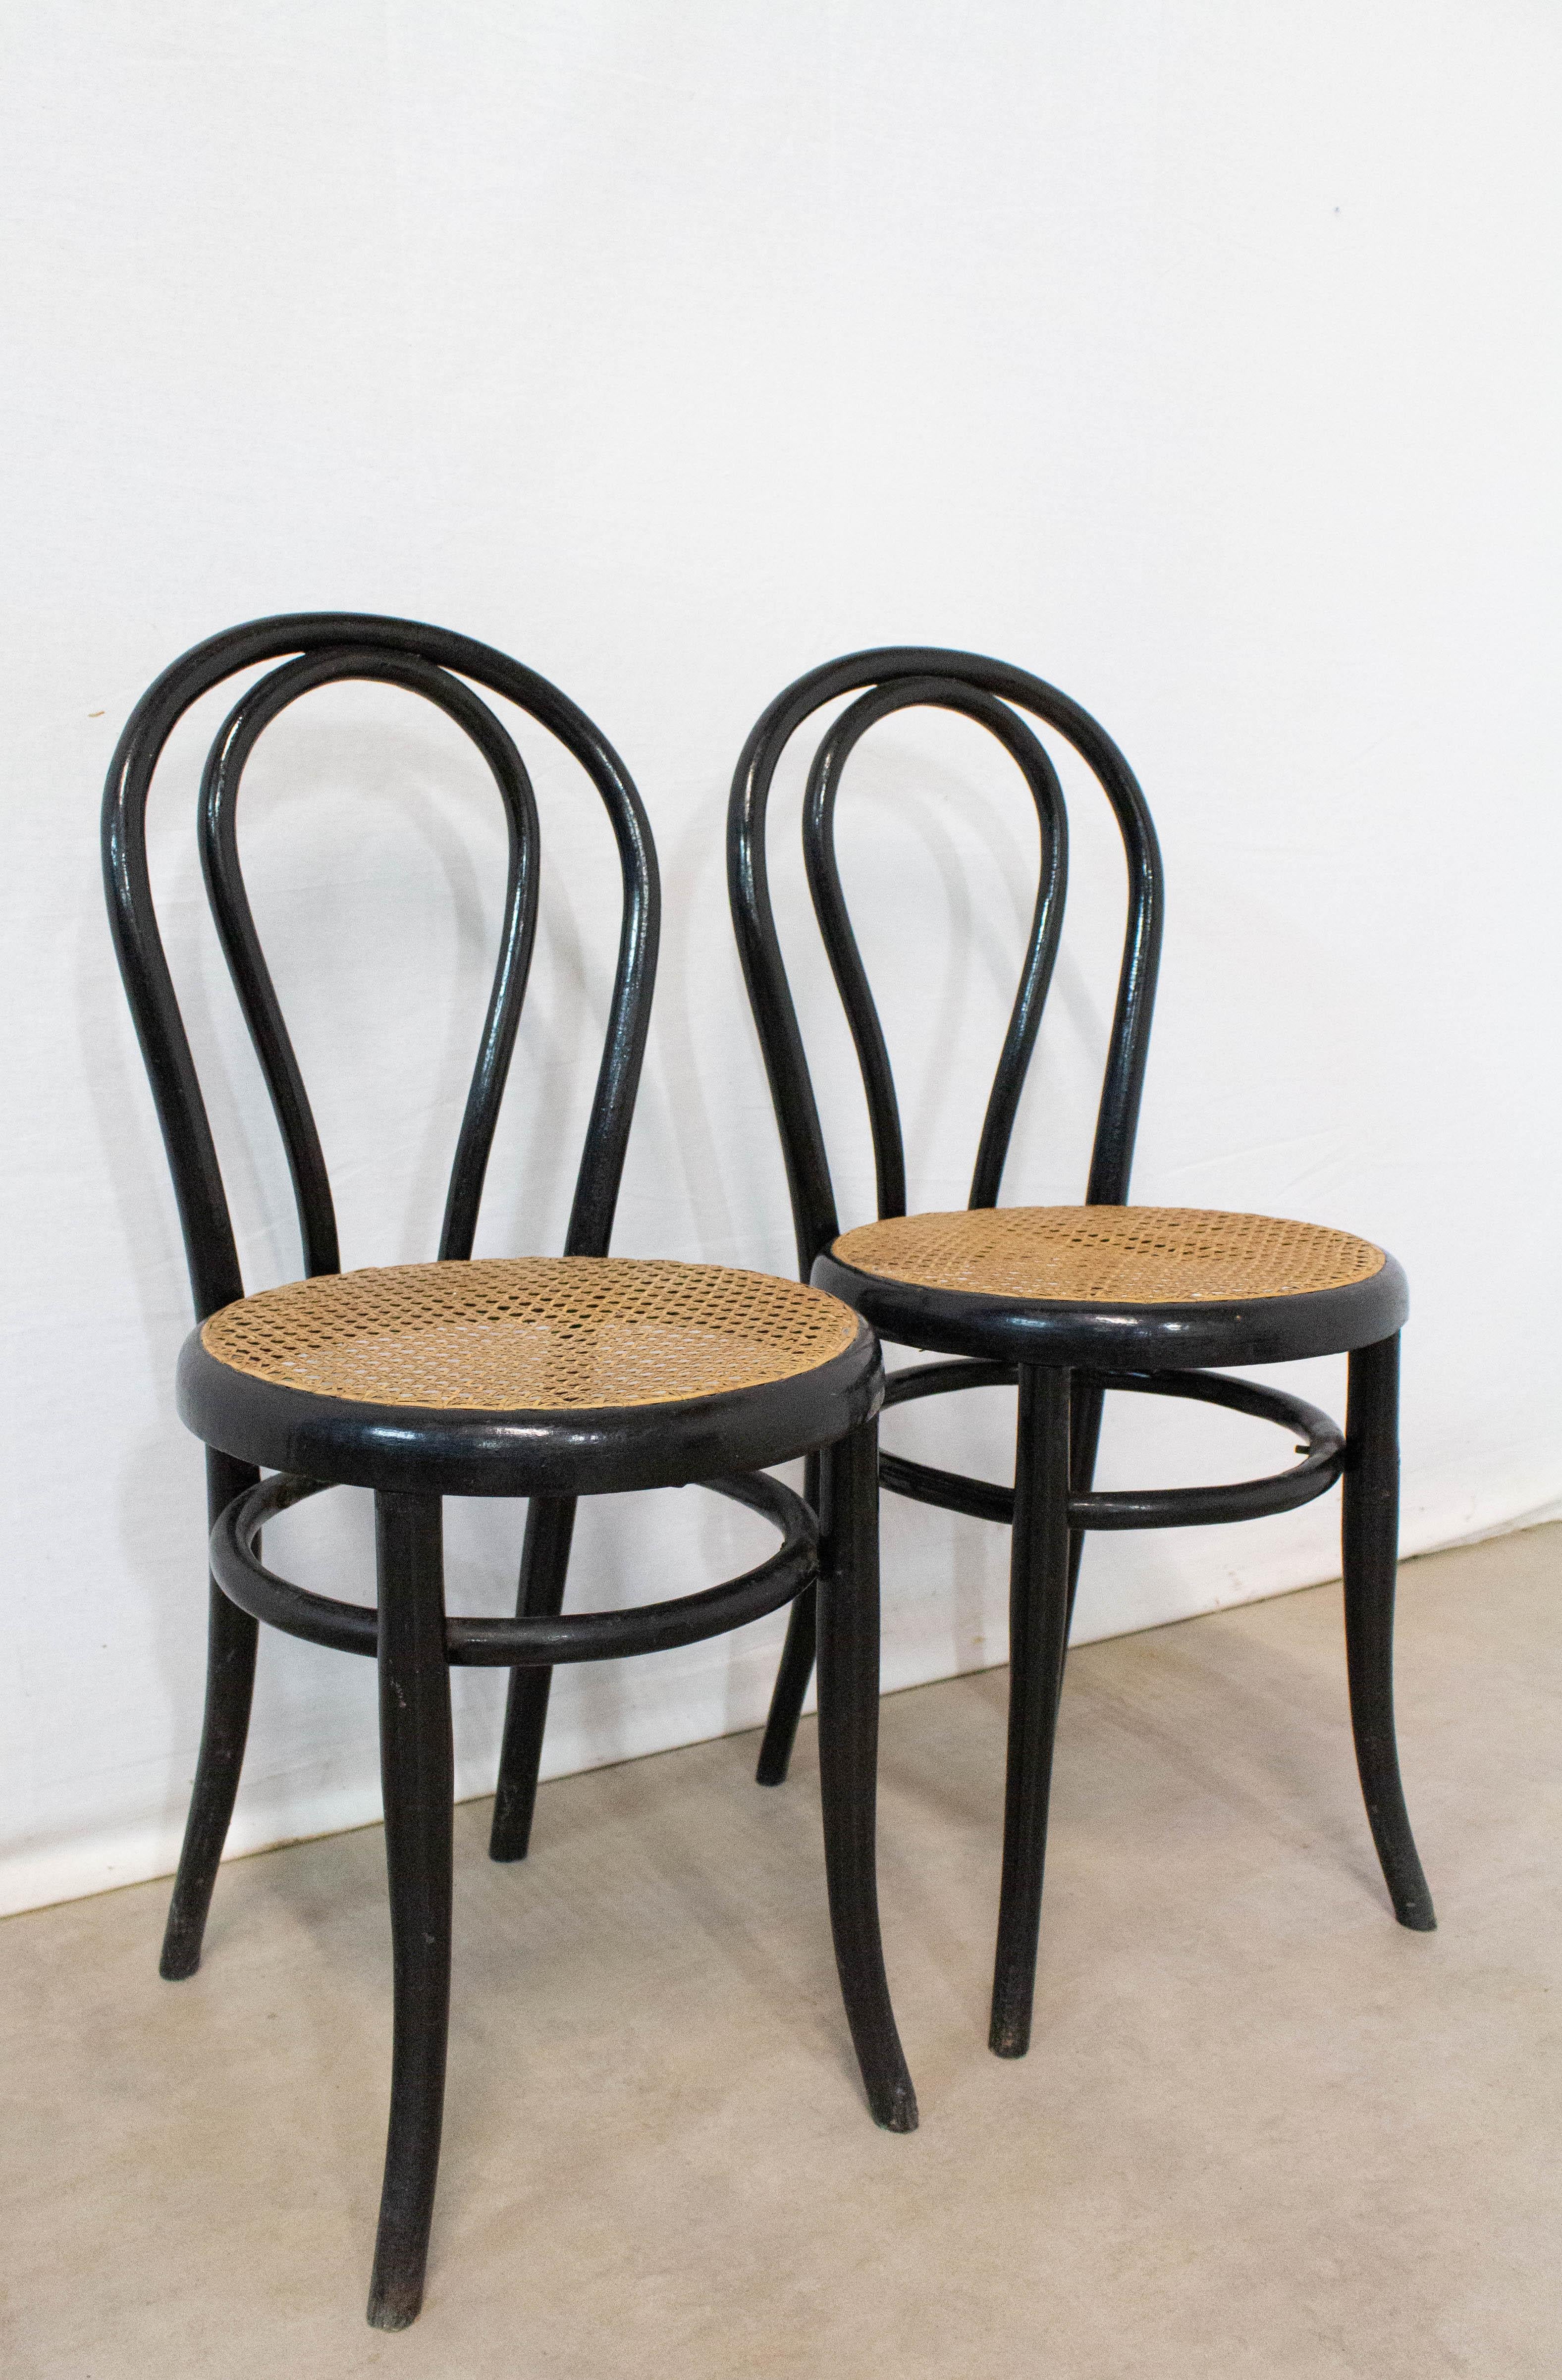 French Bistro Caned Dining Chairs Fischel Thonet Style, France, Late 19th Century, Pair